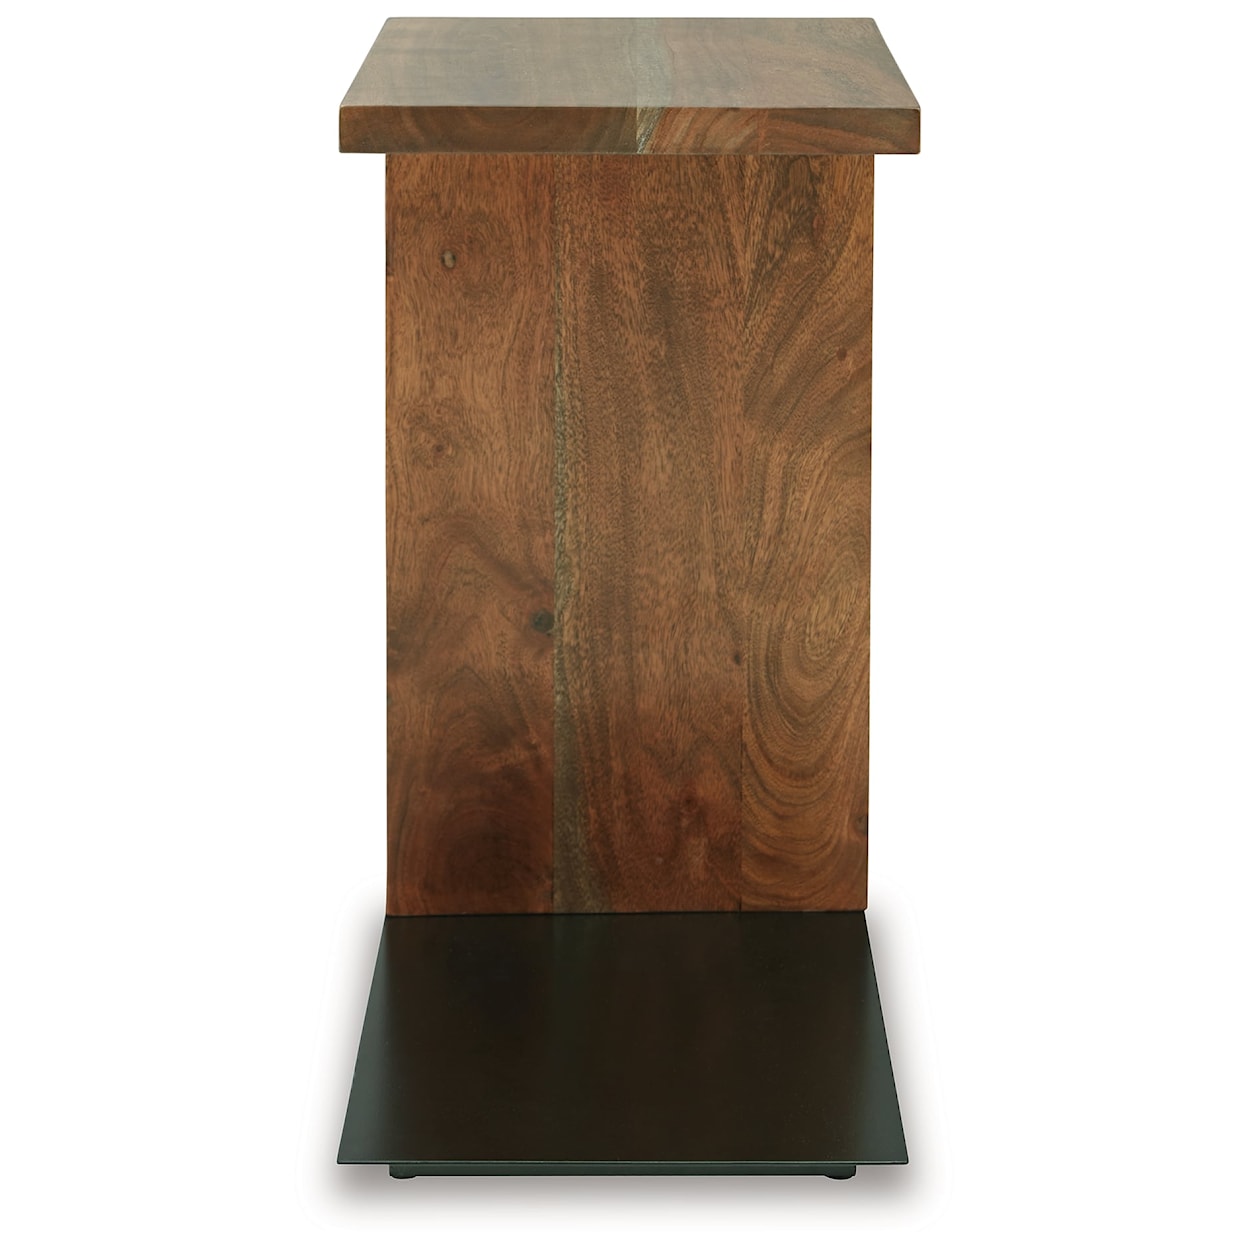 Ashley Furniture Signature Design Wimshaw Accent Table